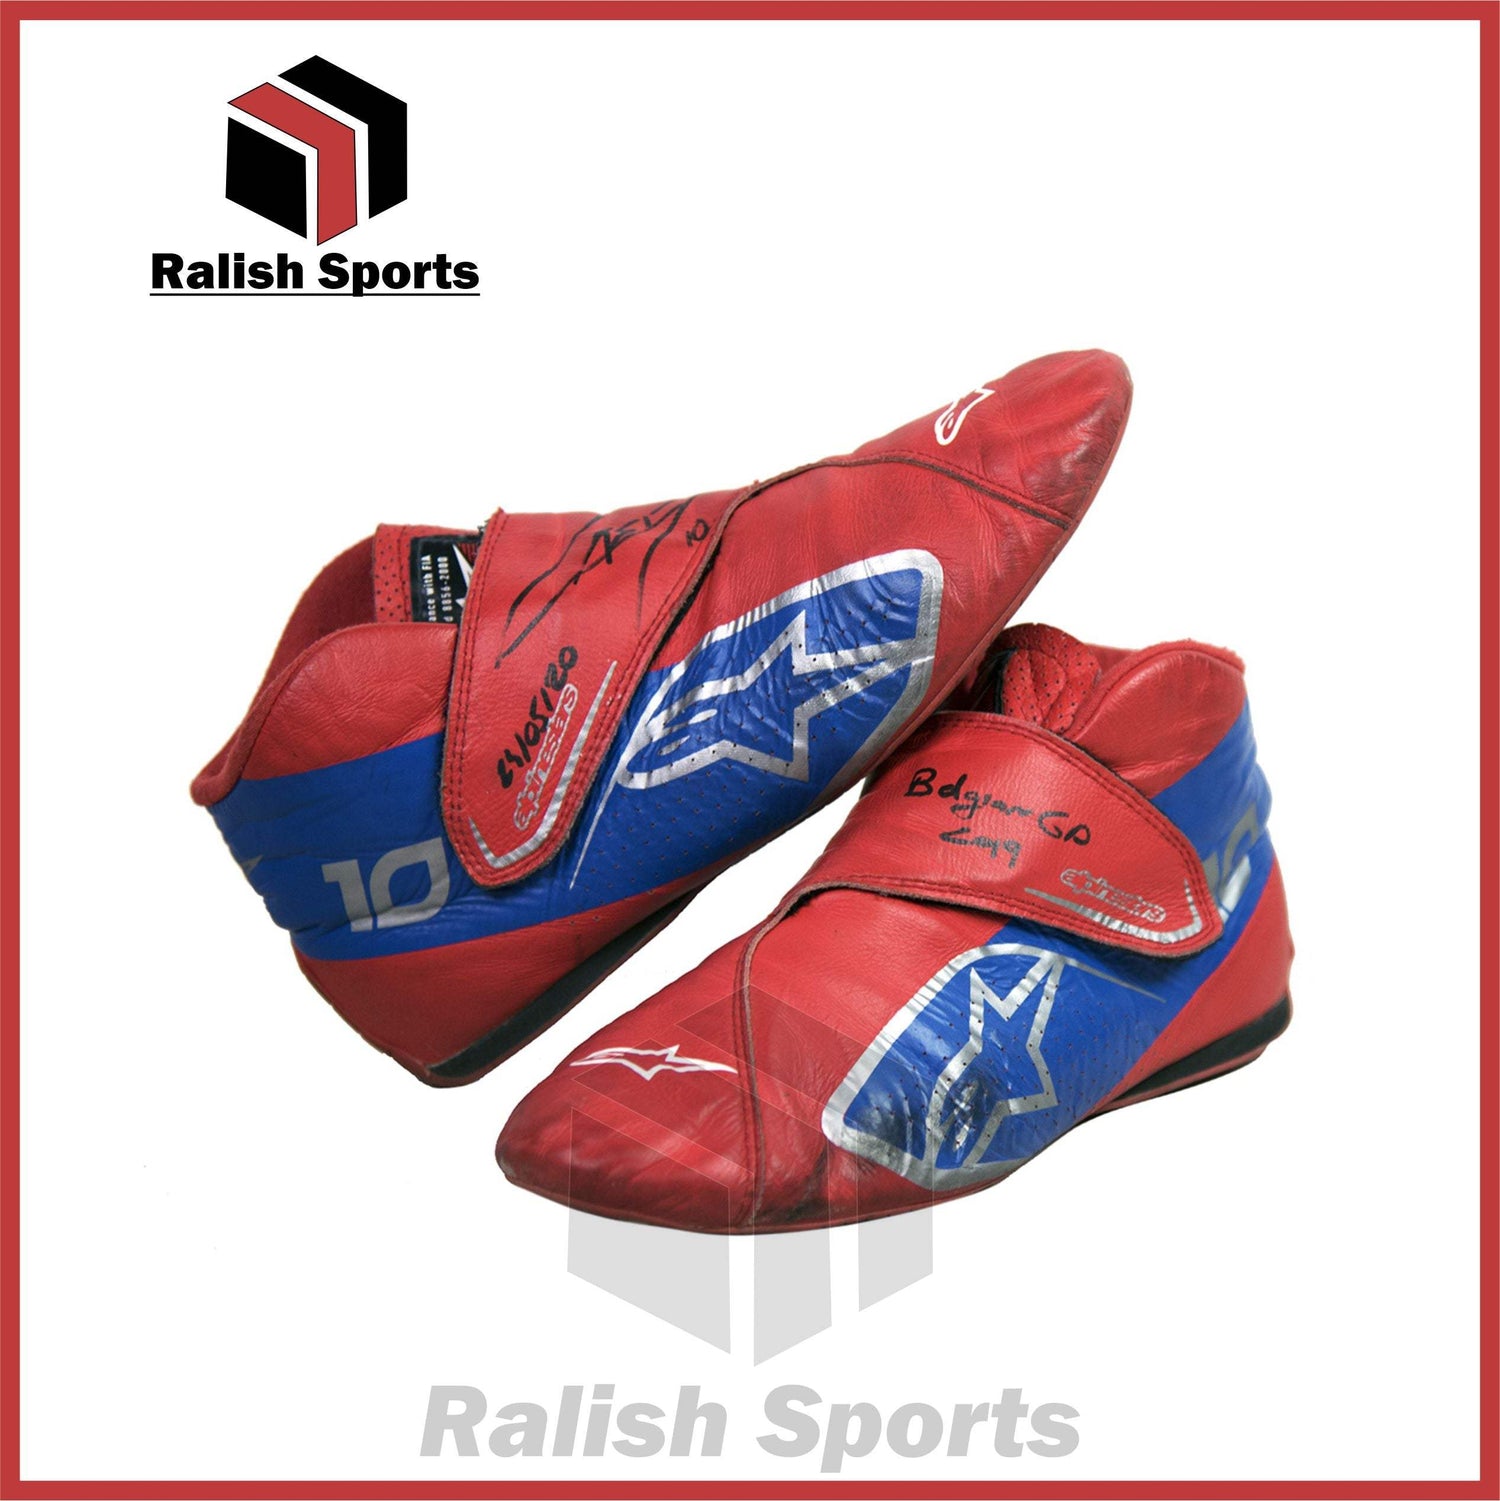 PIERRE GASLY Race Shoes 2019 - Ralish Sports